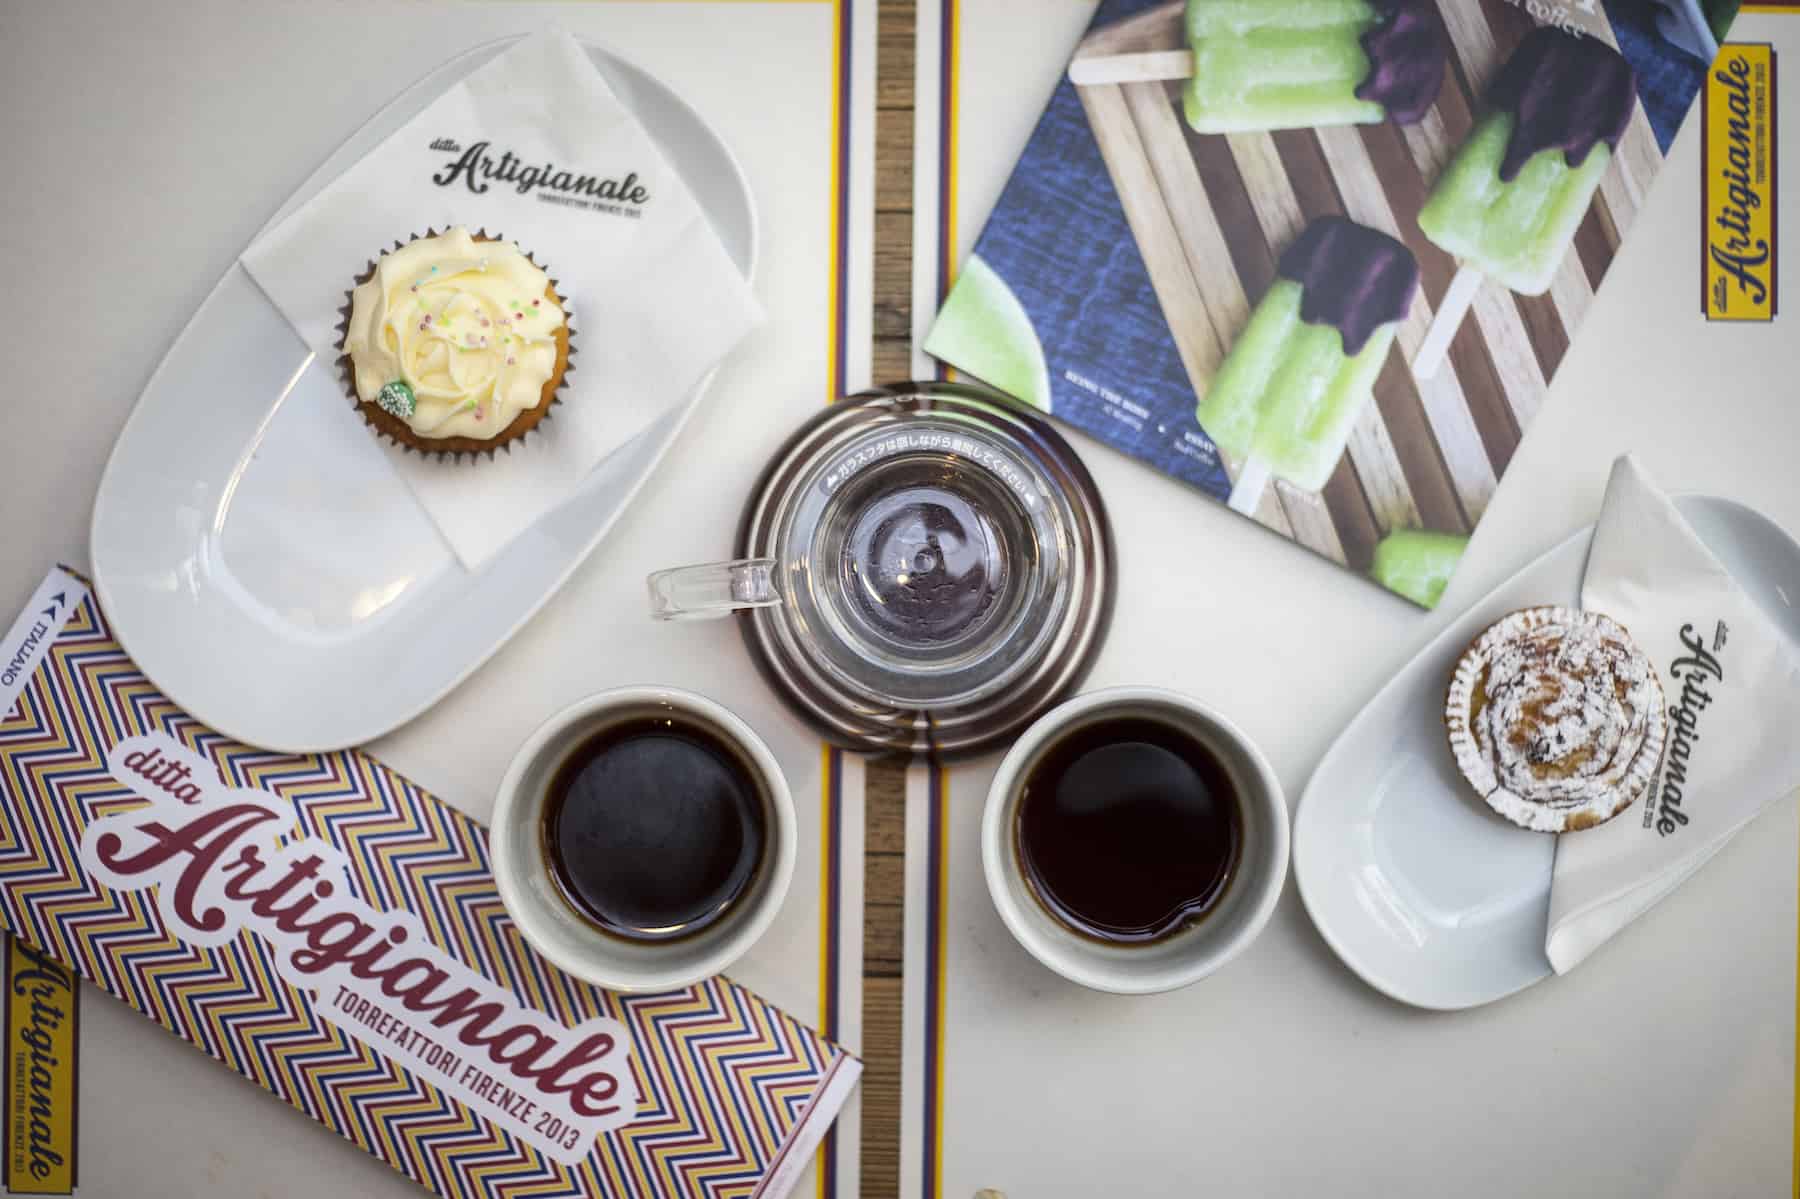  Ditta Artigianale is our favorite place to go for coffee and cake in Florence, Italy.